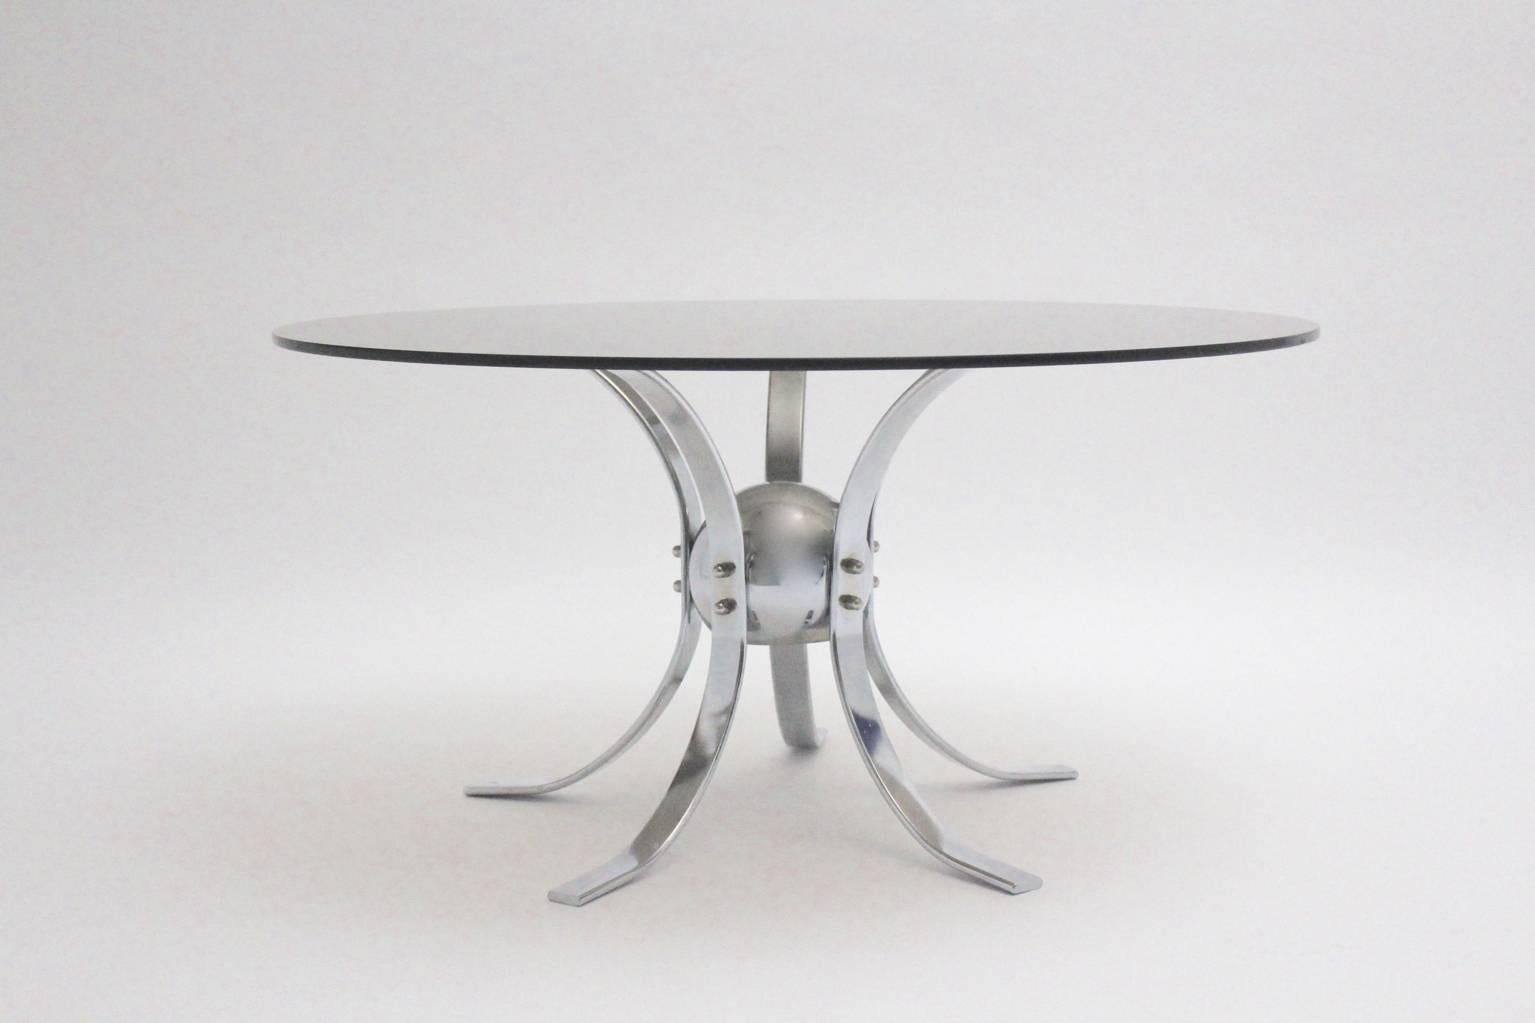 Space Age vintage coffee table from chromed metal and a round glass plate,  which shows a sputnik form.
Designed and manufactured in the 1960s.
Good condition with signs of age and use.
approx. measures:
Base: Diameter 26.77 in (68 cm),
 height